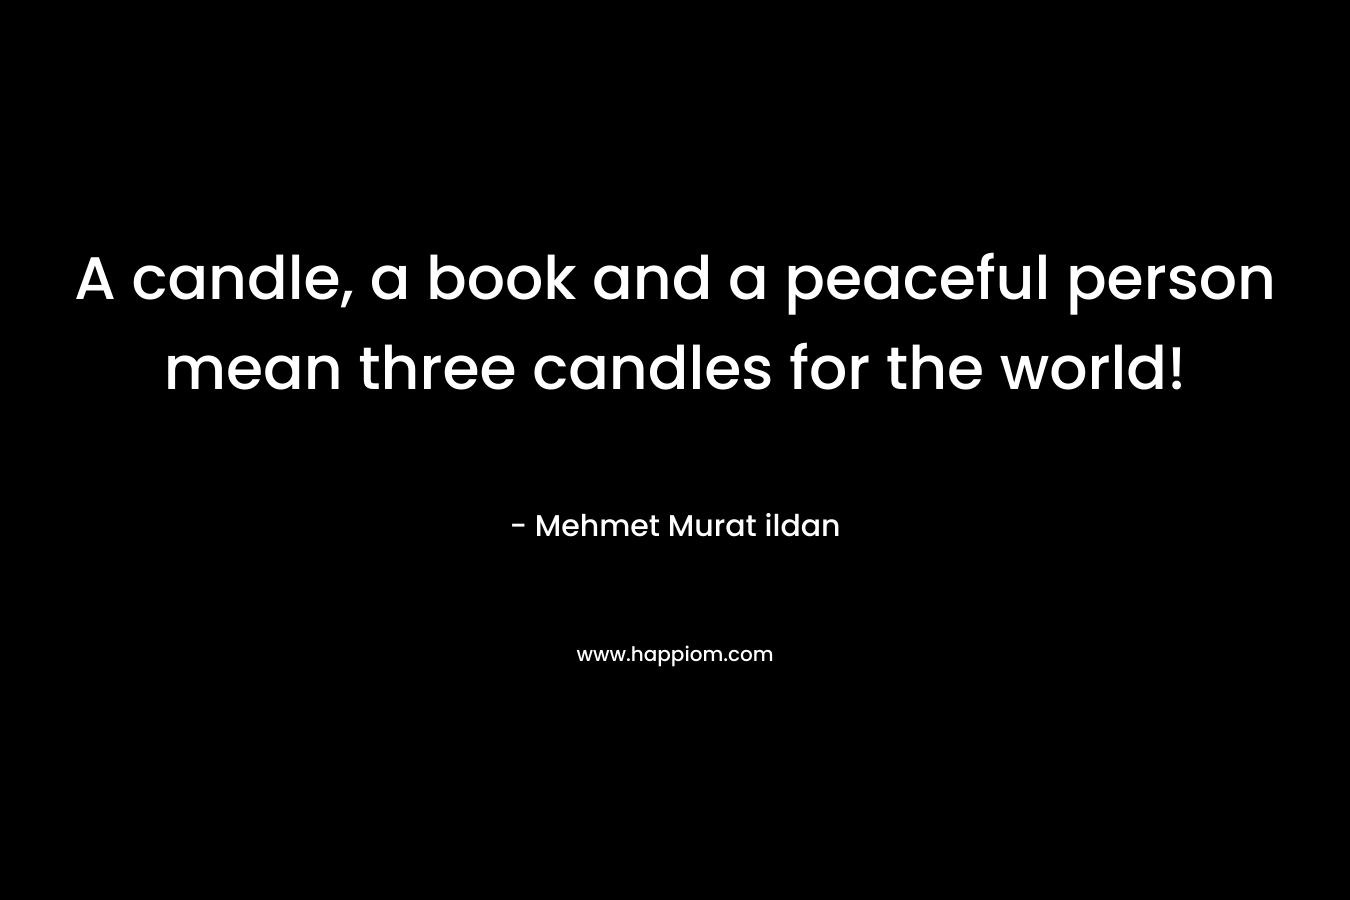 A candle, a book and a peaceful person mean three candles for the world! – Mehmet Murat ildan